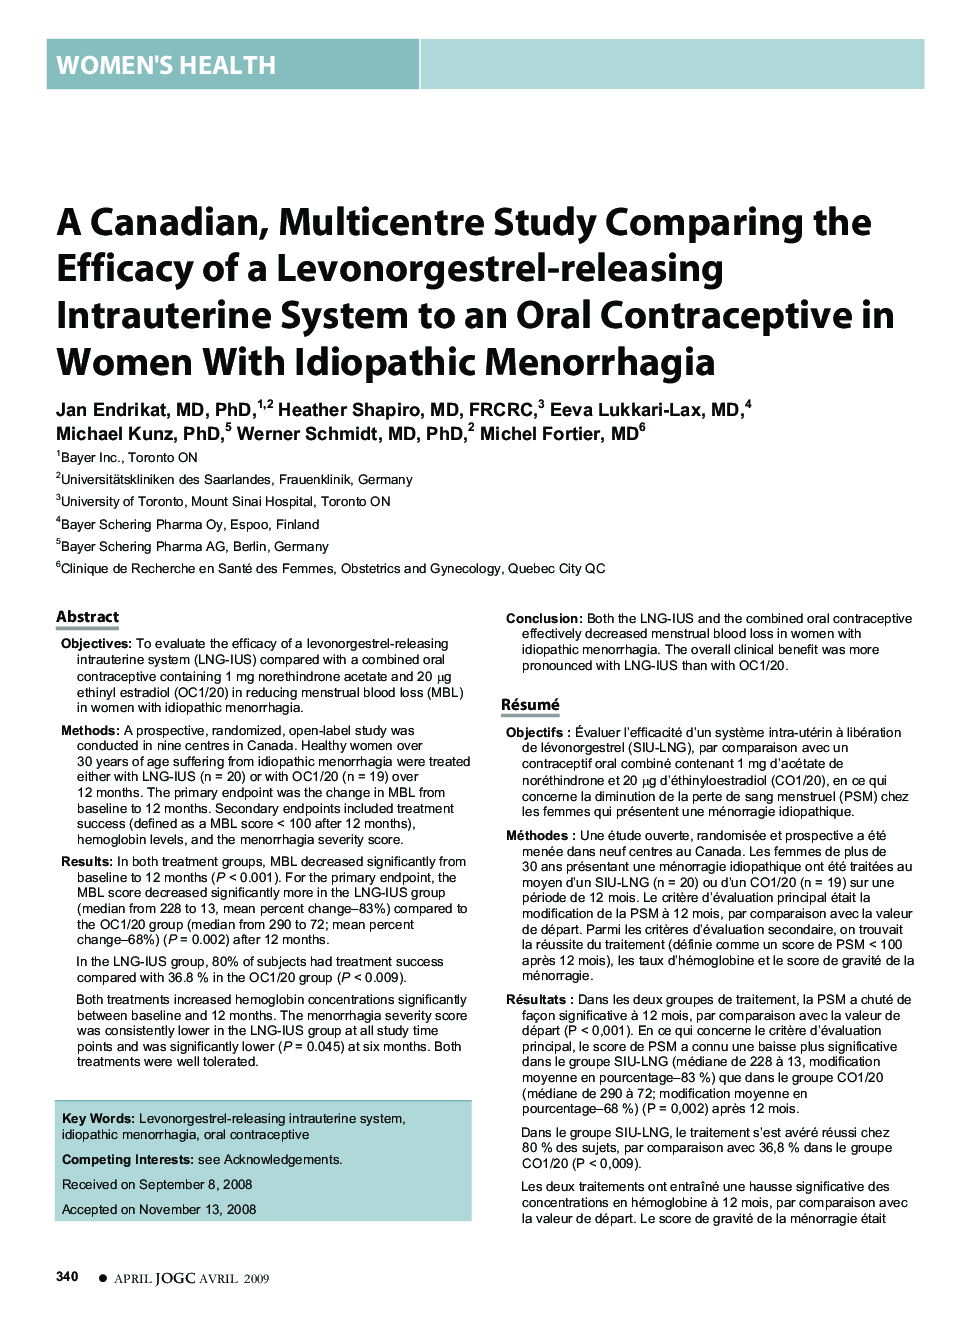 A Canadian, Multicentre Study Comparing the Efficacy of a Levonorgestrel-releasing Intrauterine System to an Oral Contraceptive in Women With Idiopathic Menorrhagia